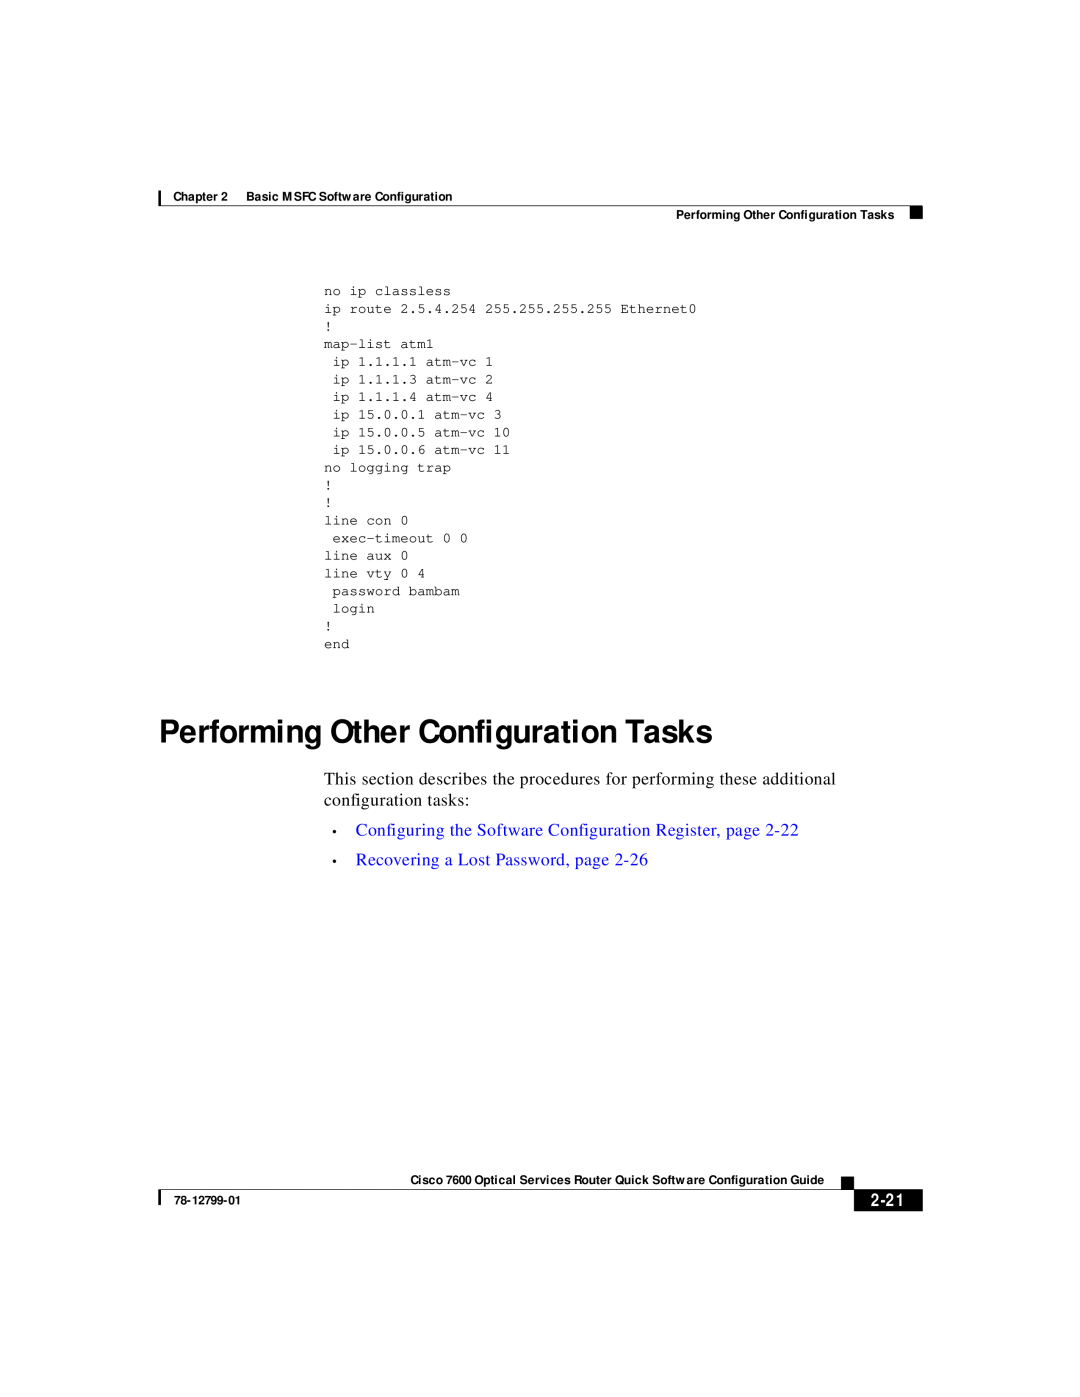 Cisco Systems 7600 manual Performing Other Configuration Tasks, Configuring the Software Configuration Register, page, 2-21 